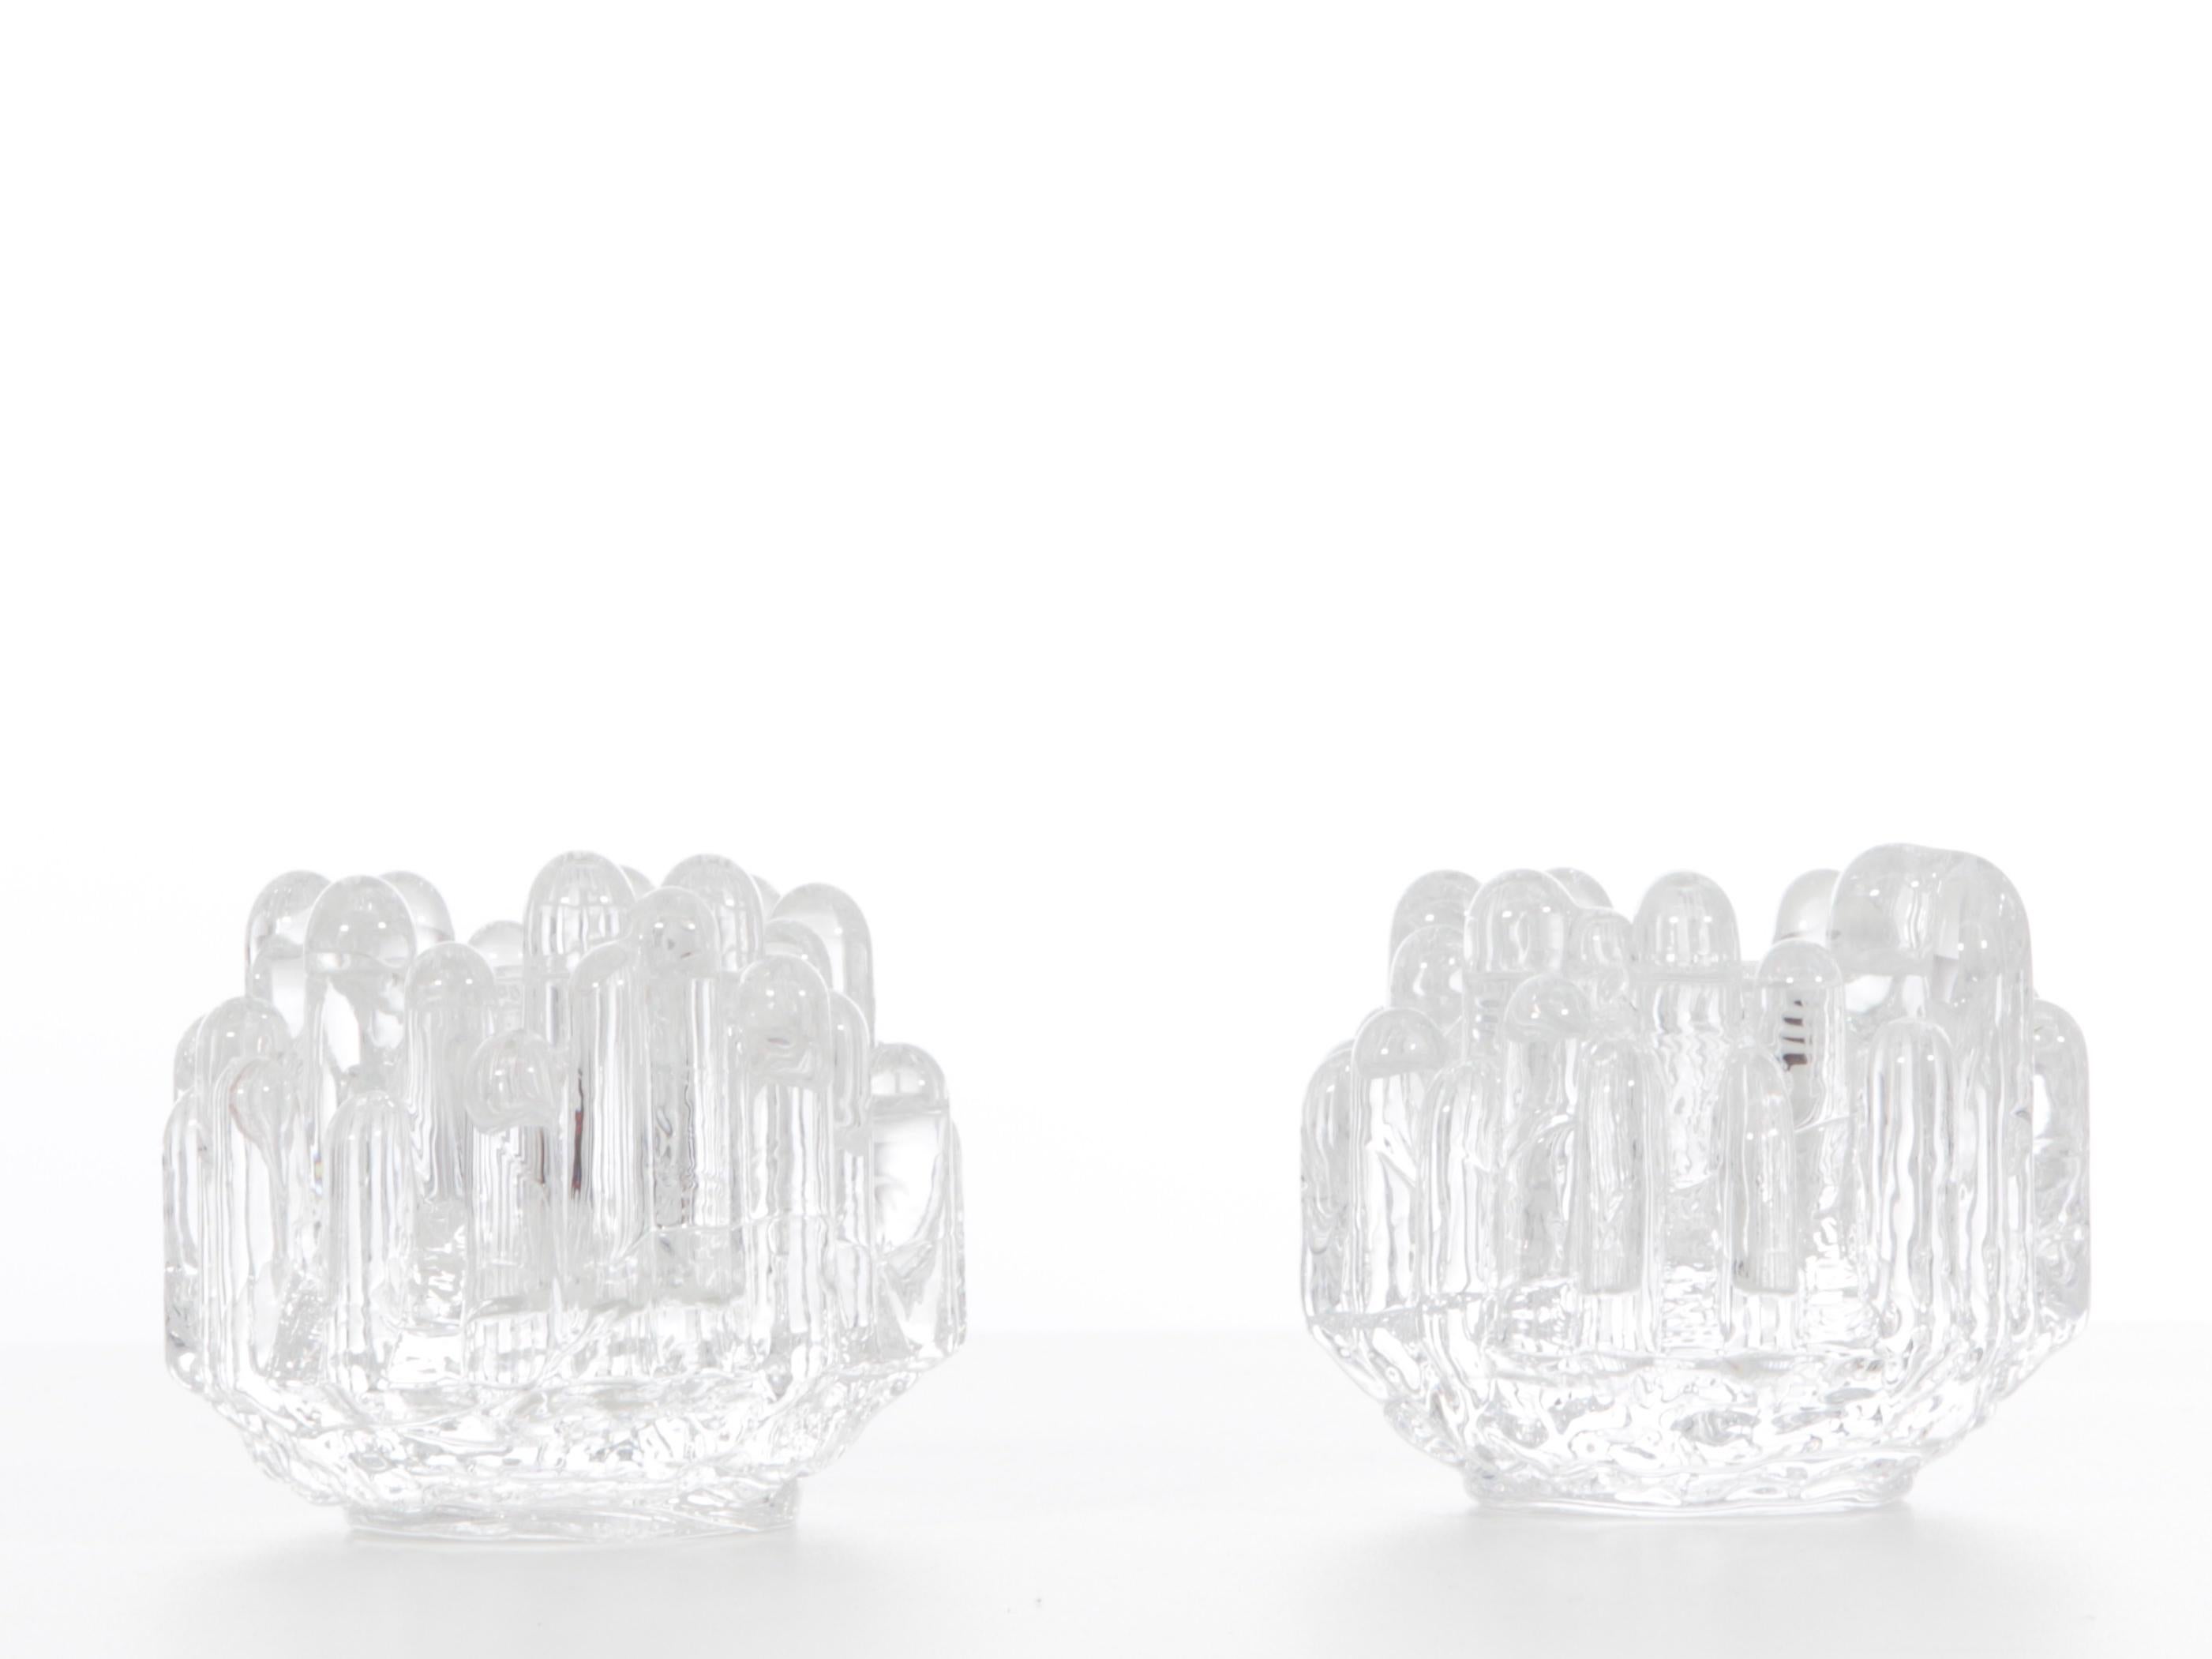 Pair of crystal Polar candlesticks by Goran Warff for Costa Boda.

Polar candleholders are a Swedish classic.
When Goran Warff created the Polar collection in the late sixties at Kosta Boda, he gave his candlesticks a form of ice block playing on